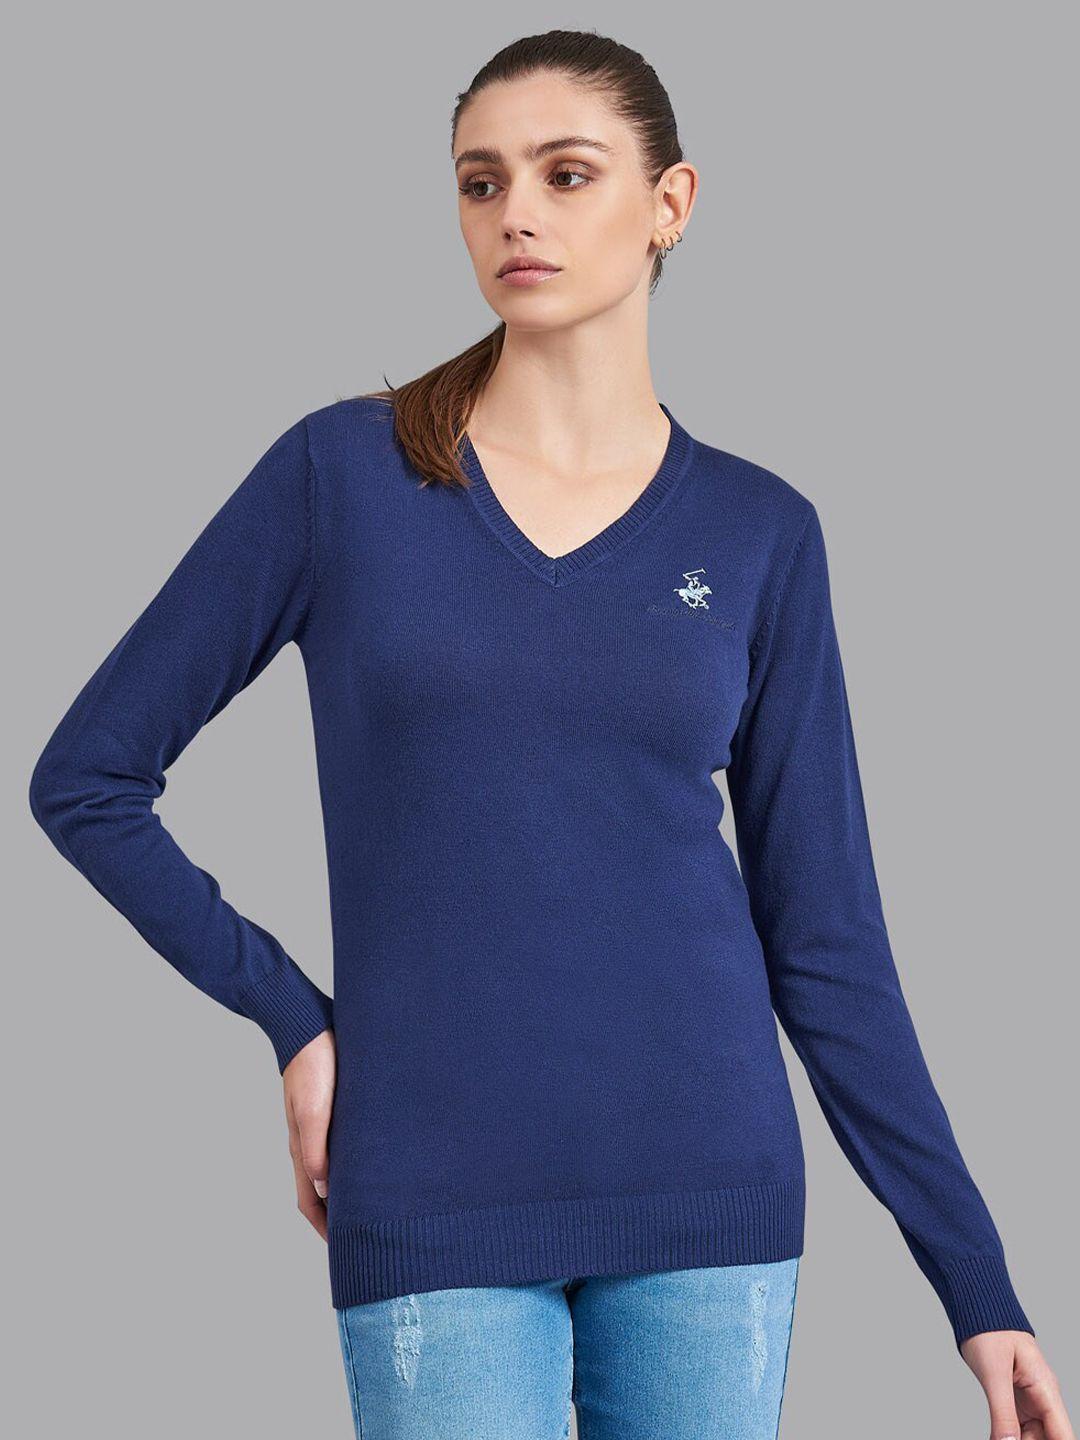 beverly hills polo club women navy blue pullover